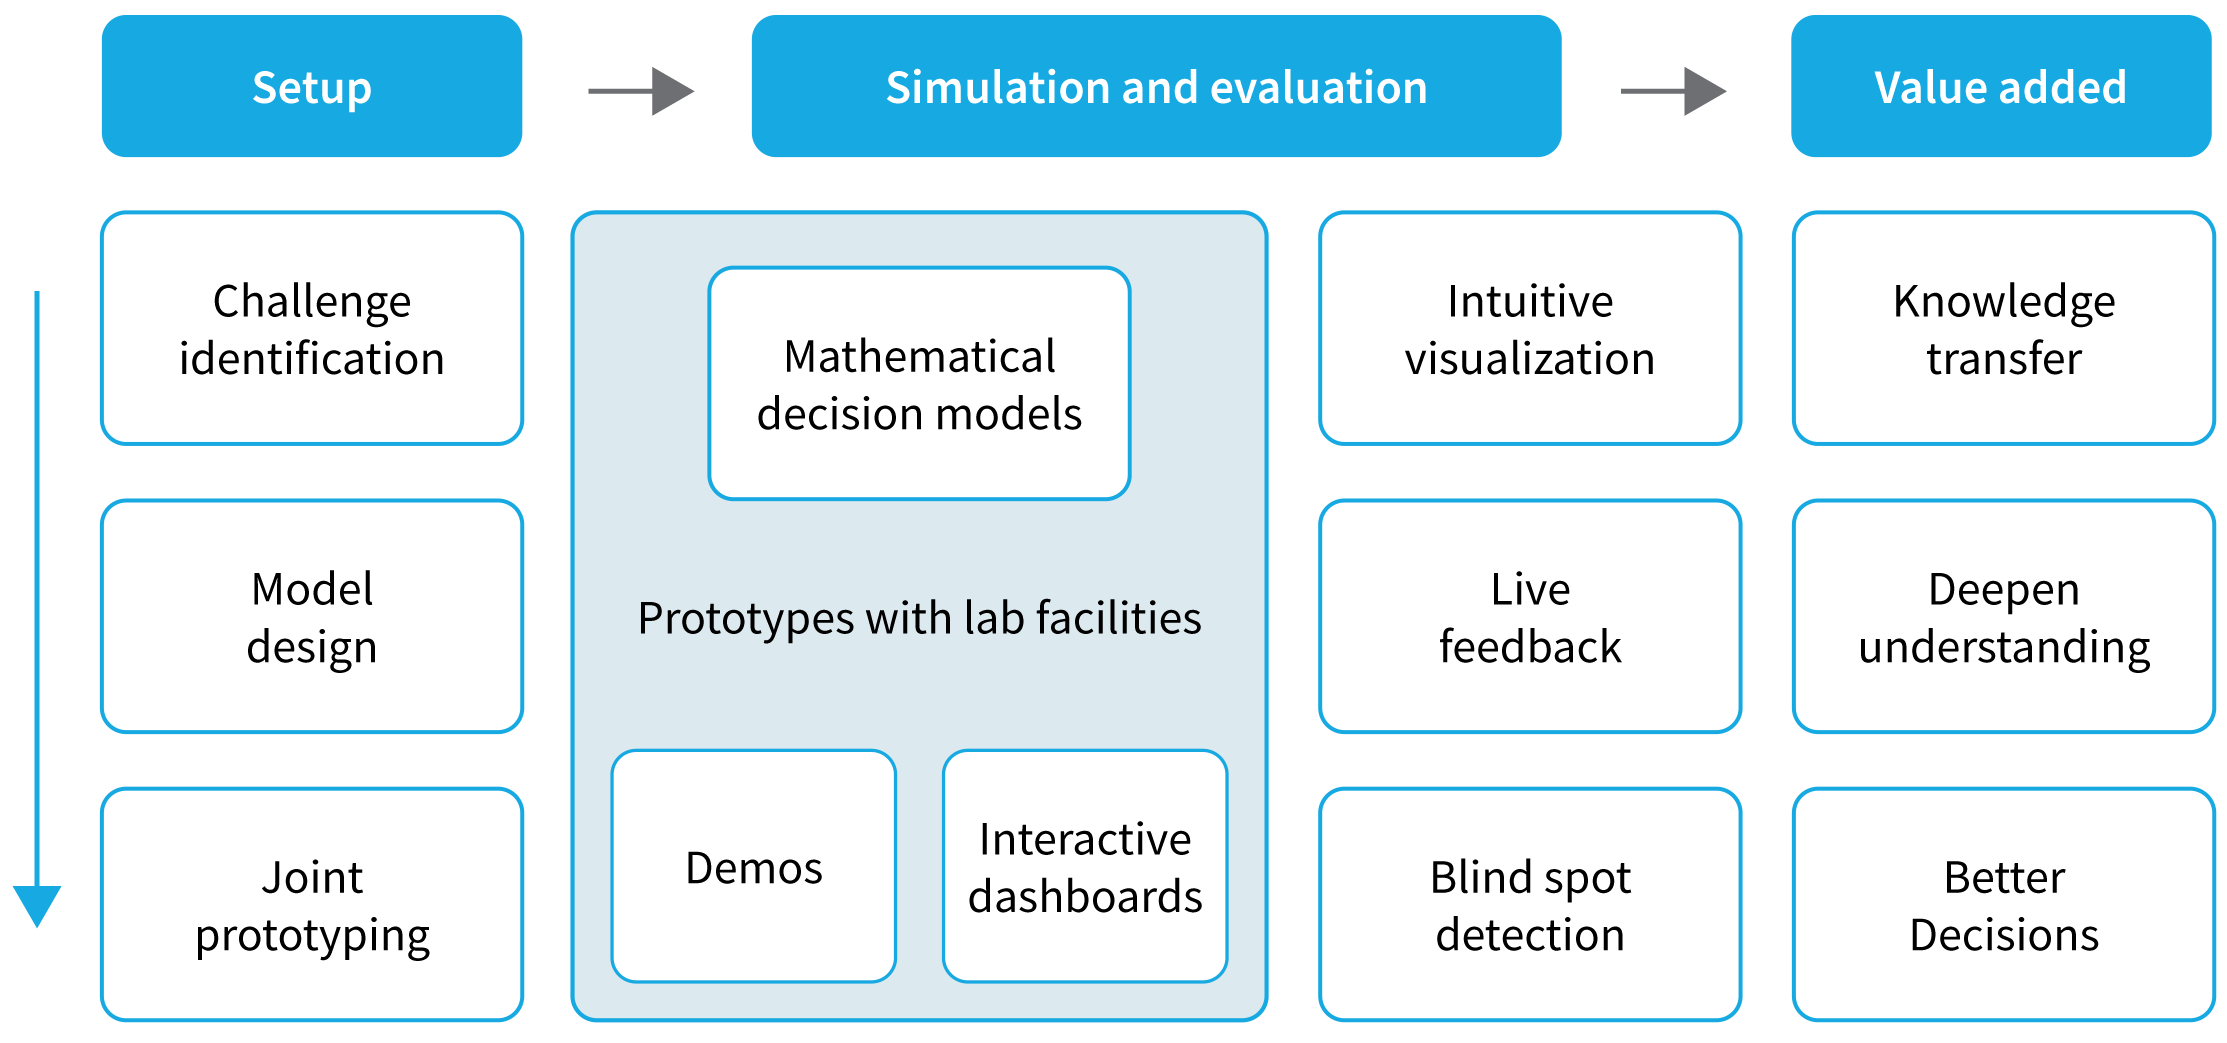 Table showing how Simulation and evaluation leads to added value